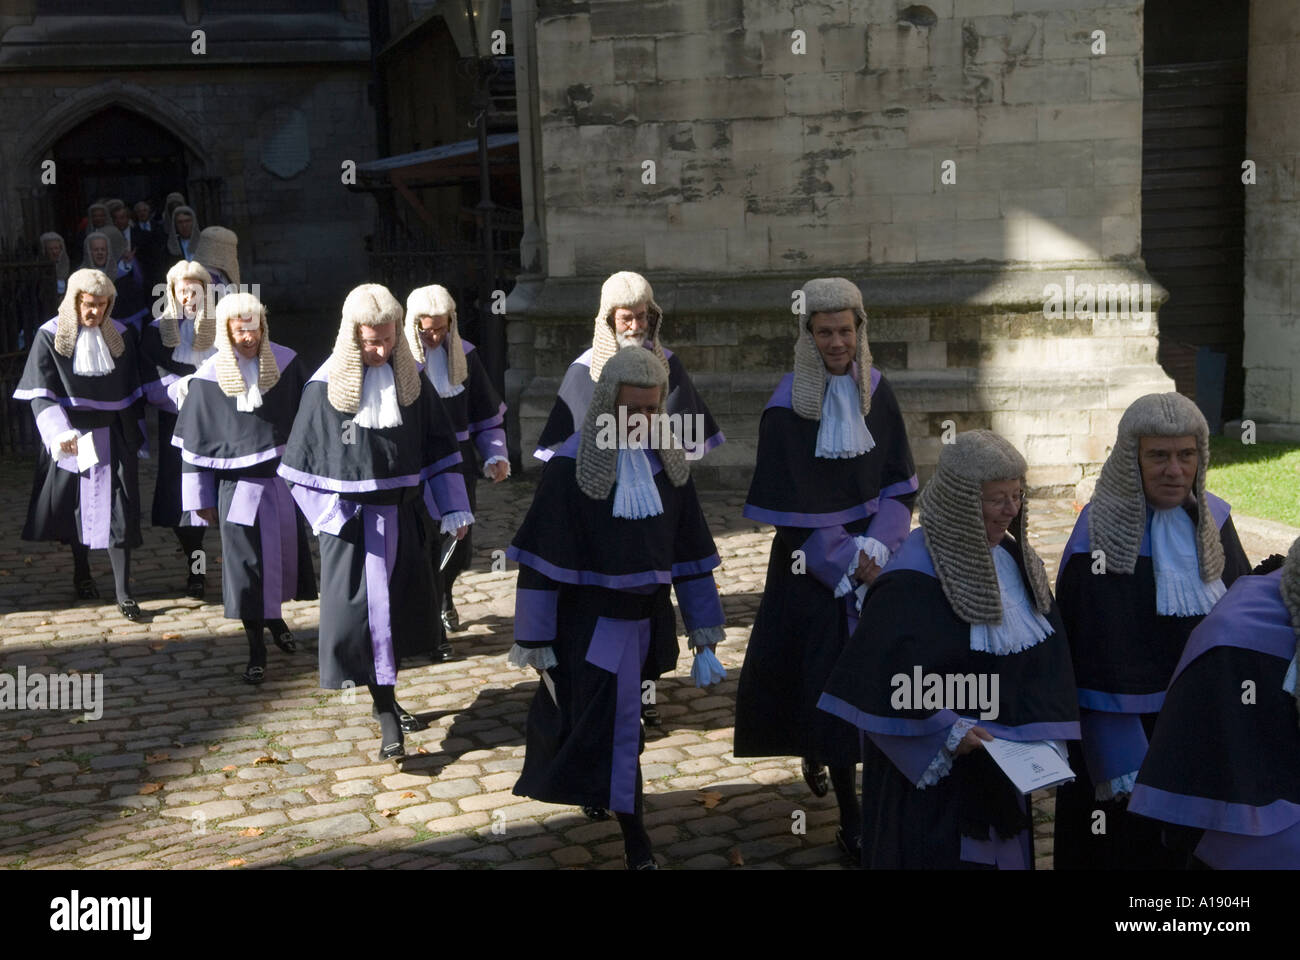 British justice legal system in step. Circuit Judges walk to the House of Lords for the Lord Chancellors Breakfast, start of the new legal year. UK Stock Photo